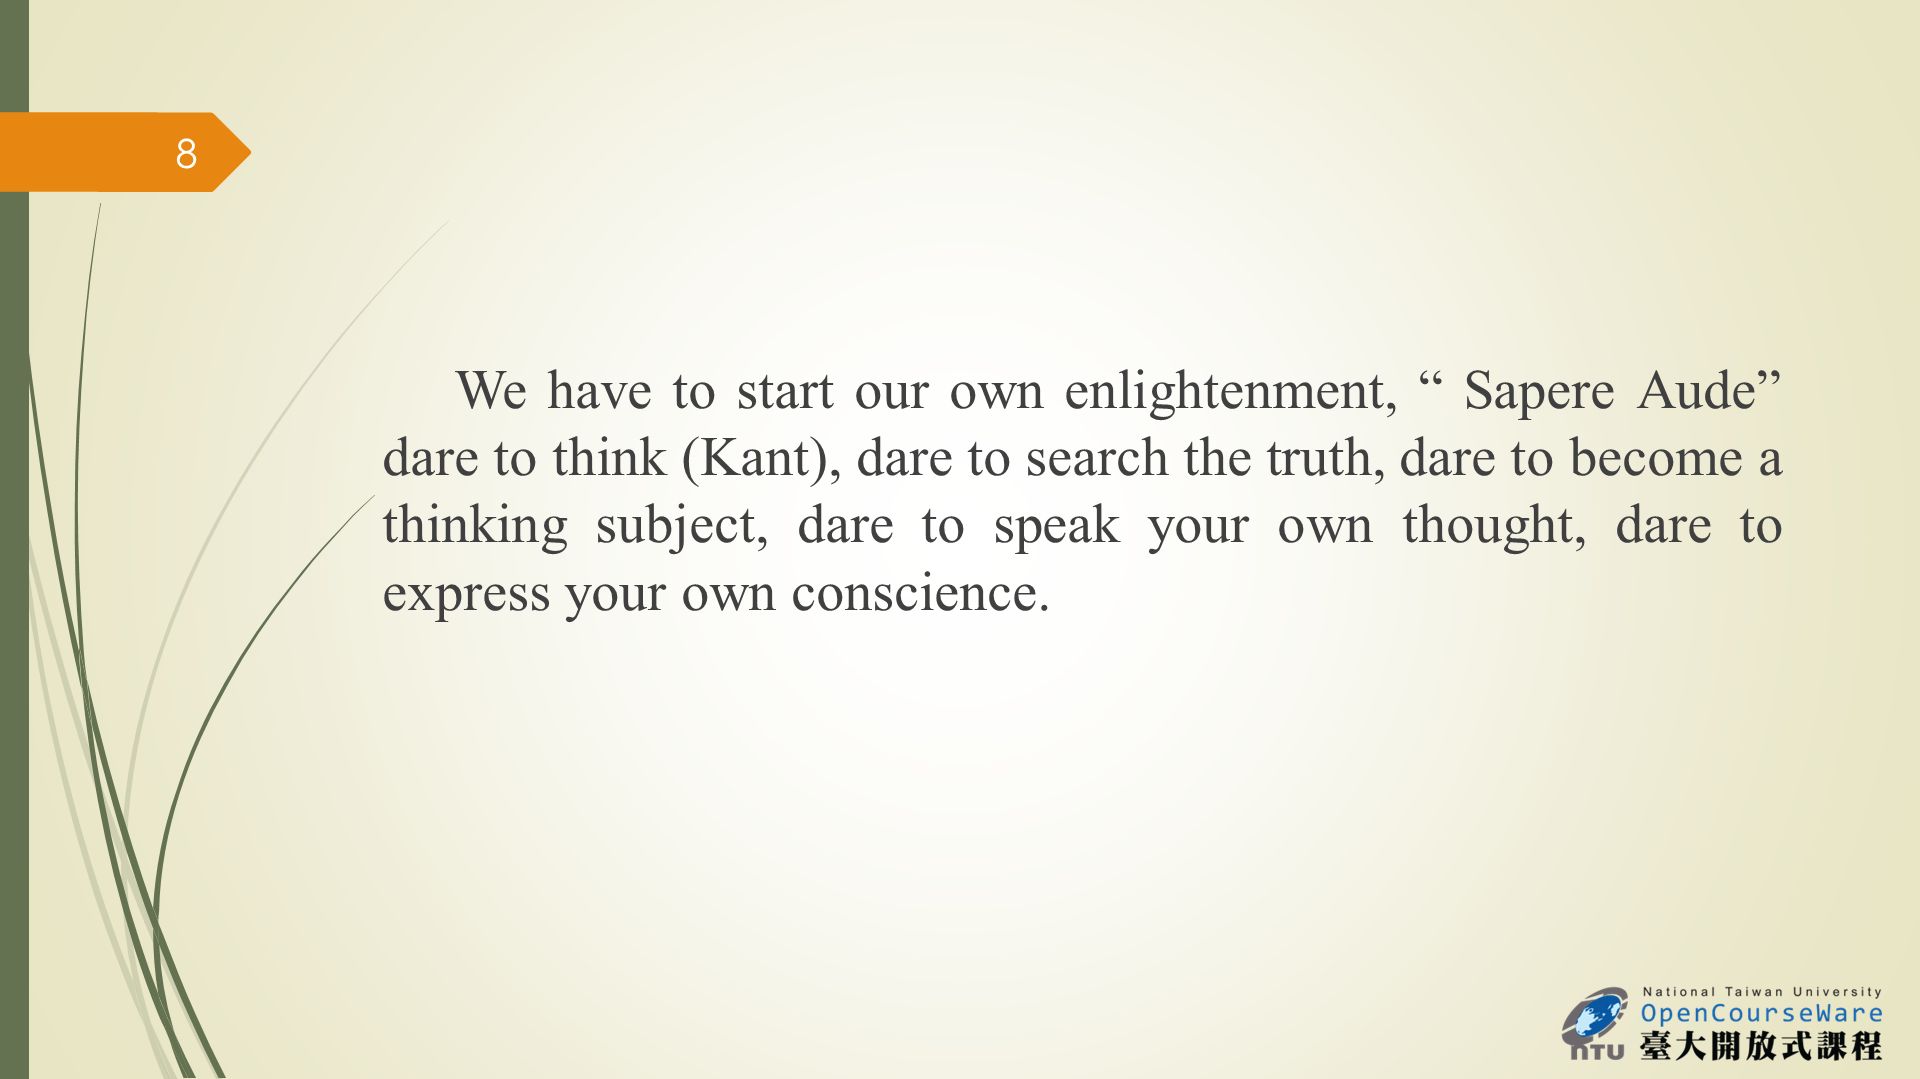 We have to start our own enlightenment, Sapere Aude dare to think (Kant), dare to search the truth, dare to become a thinking subject, dare to speak your own thought, dare to express your own conscience.